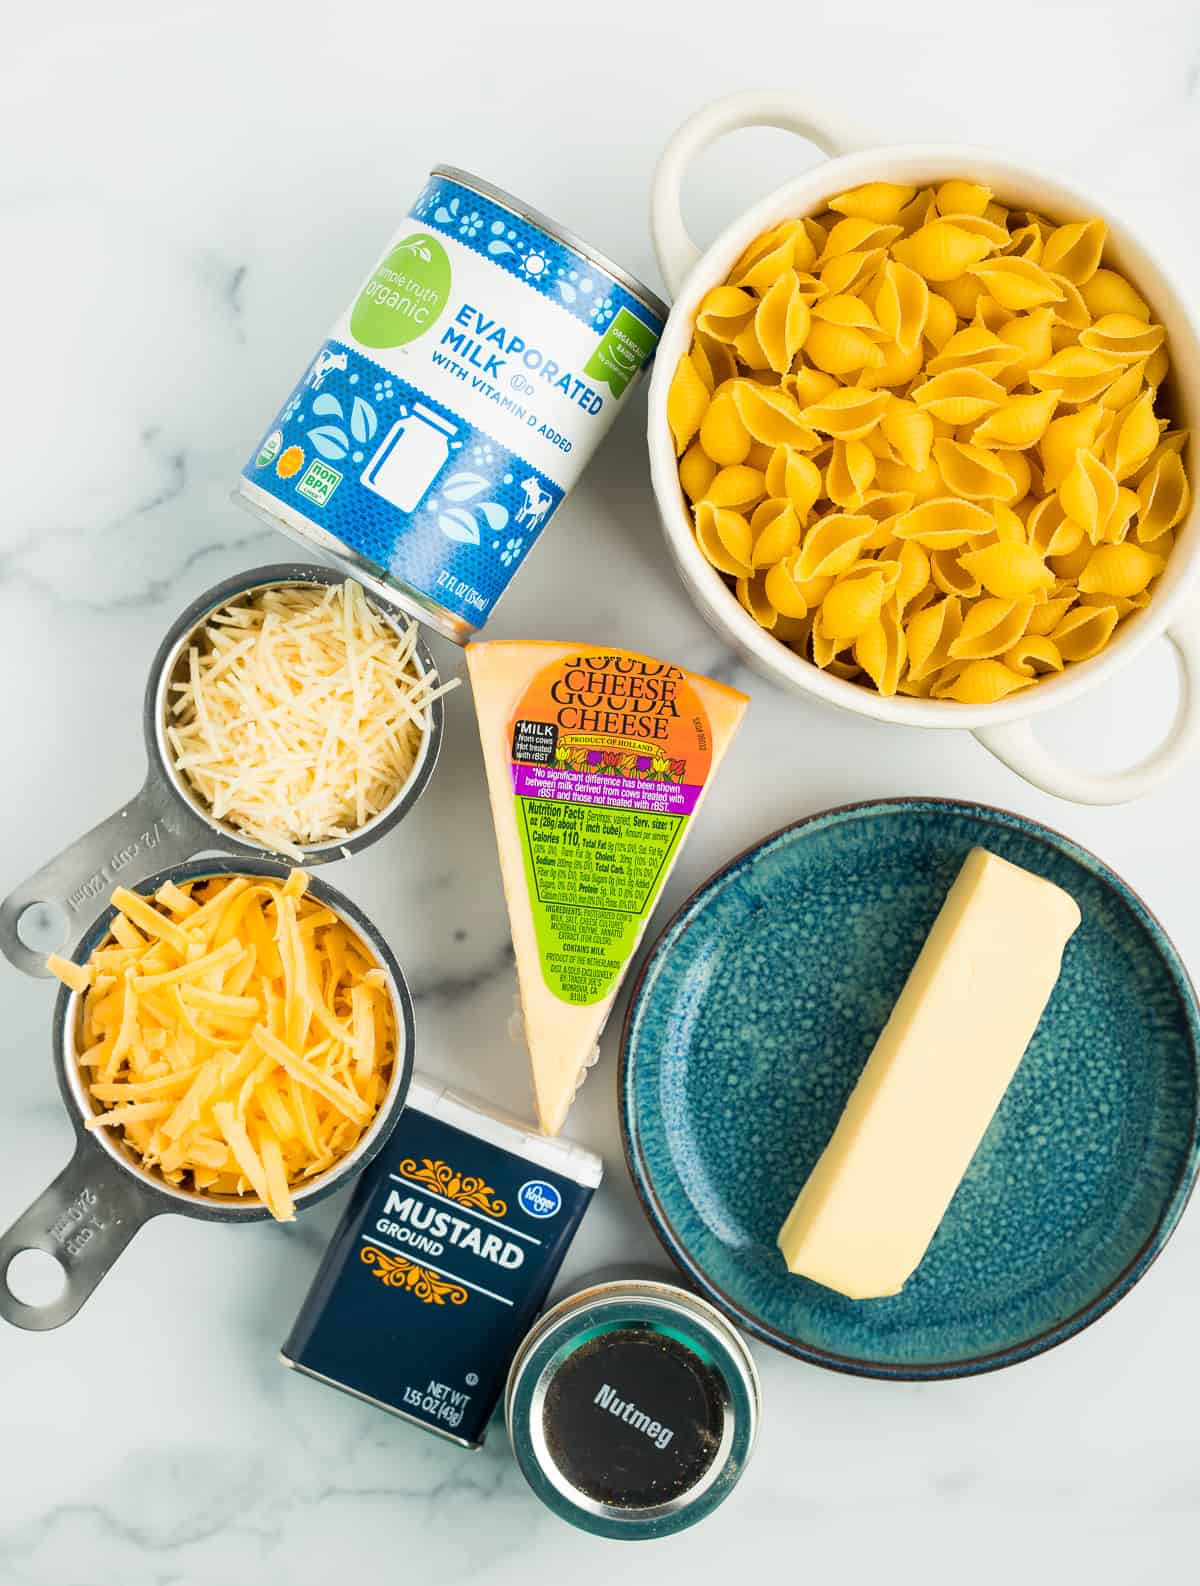 evaporated milk, shells, shredded cheese, butter, and other ingredients on a marbled board.